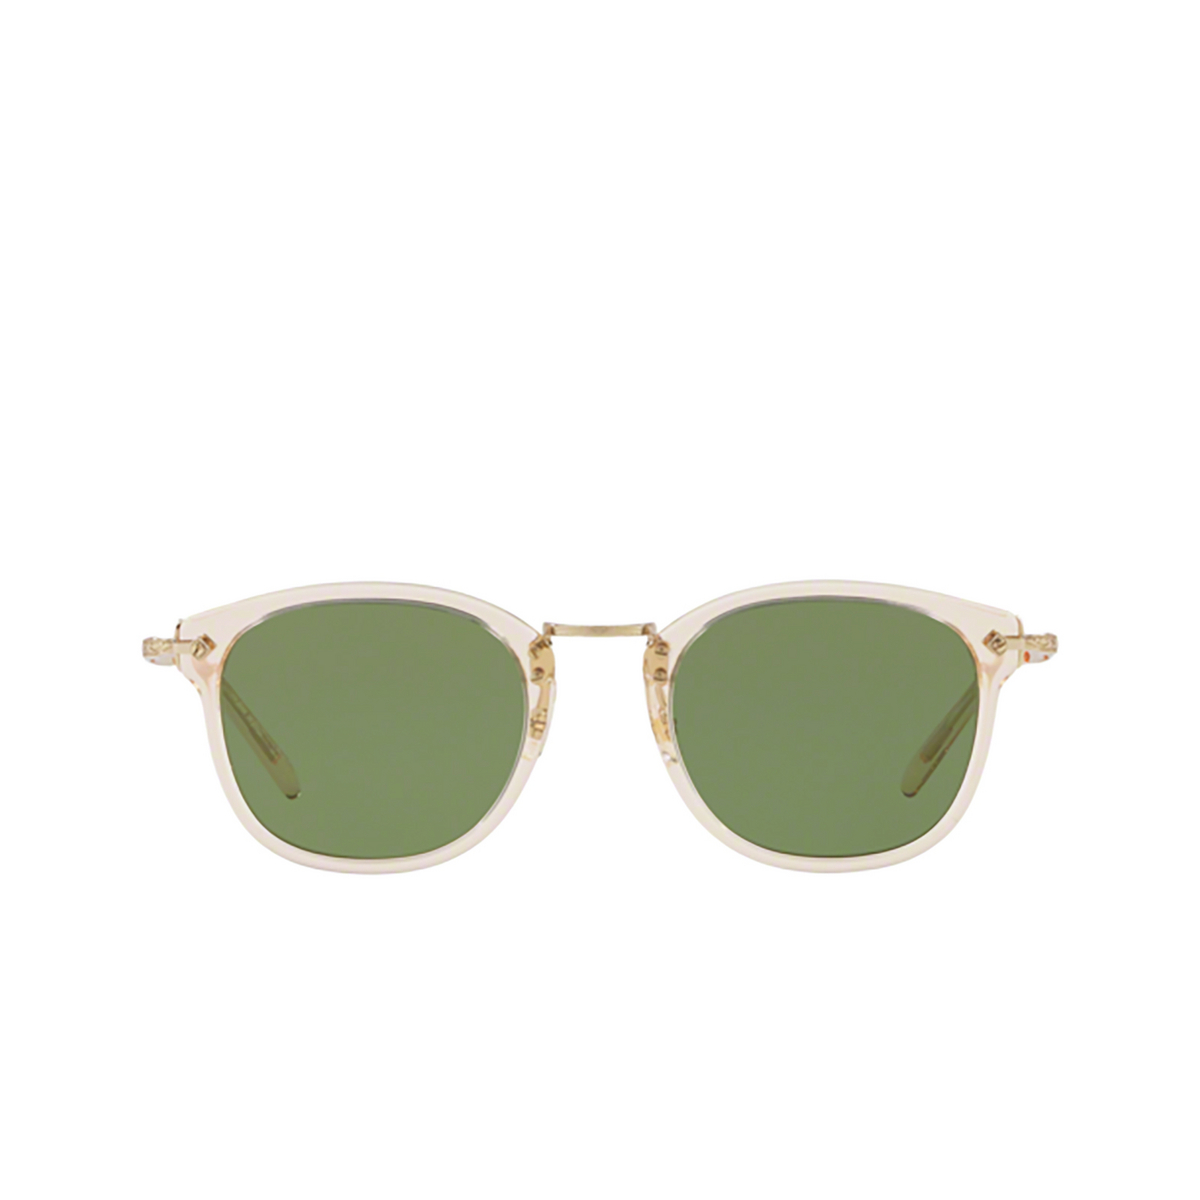 Oliver Peoples OP-506 Sunglasses 109452 Buff - front view